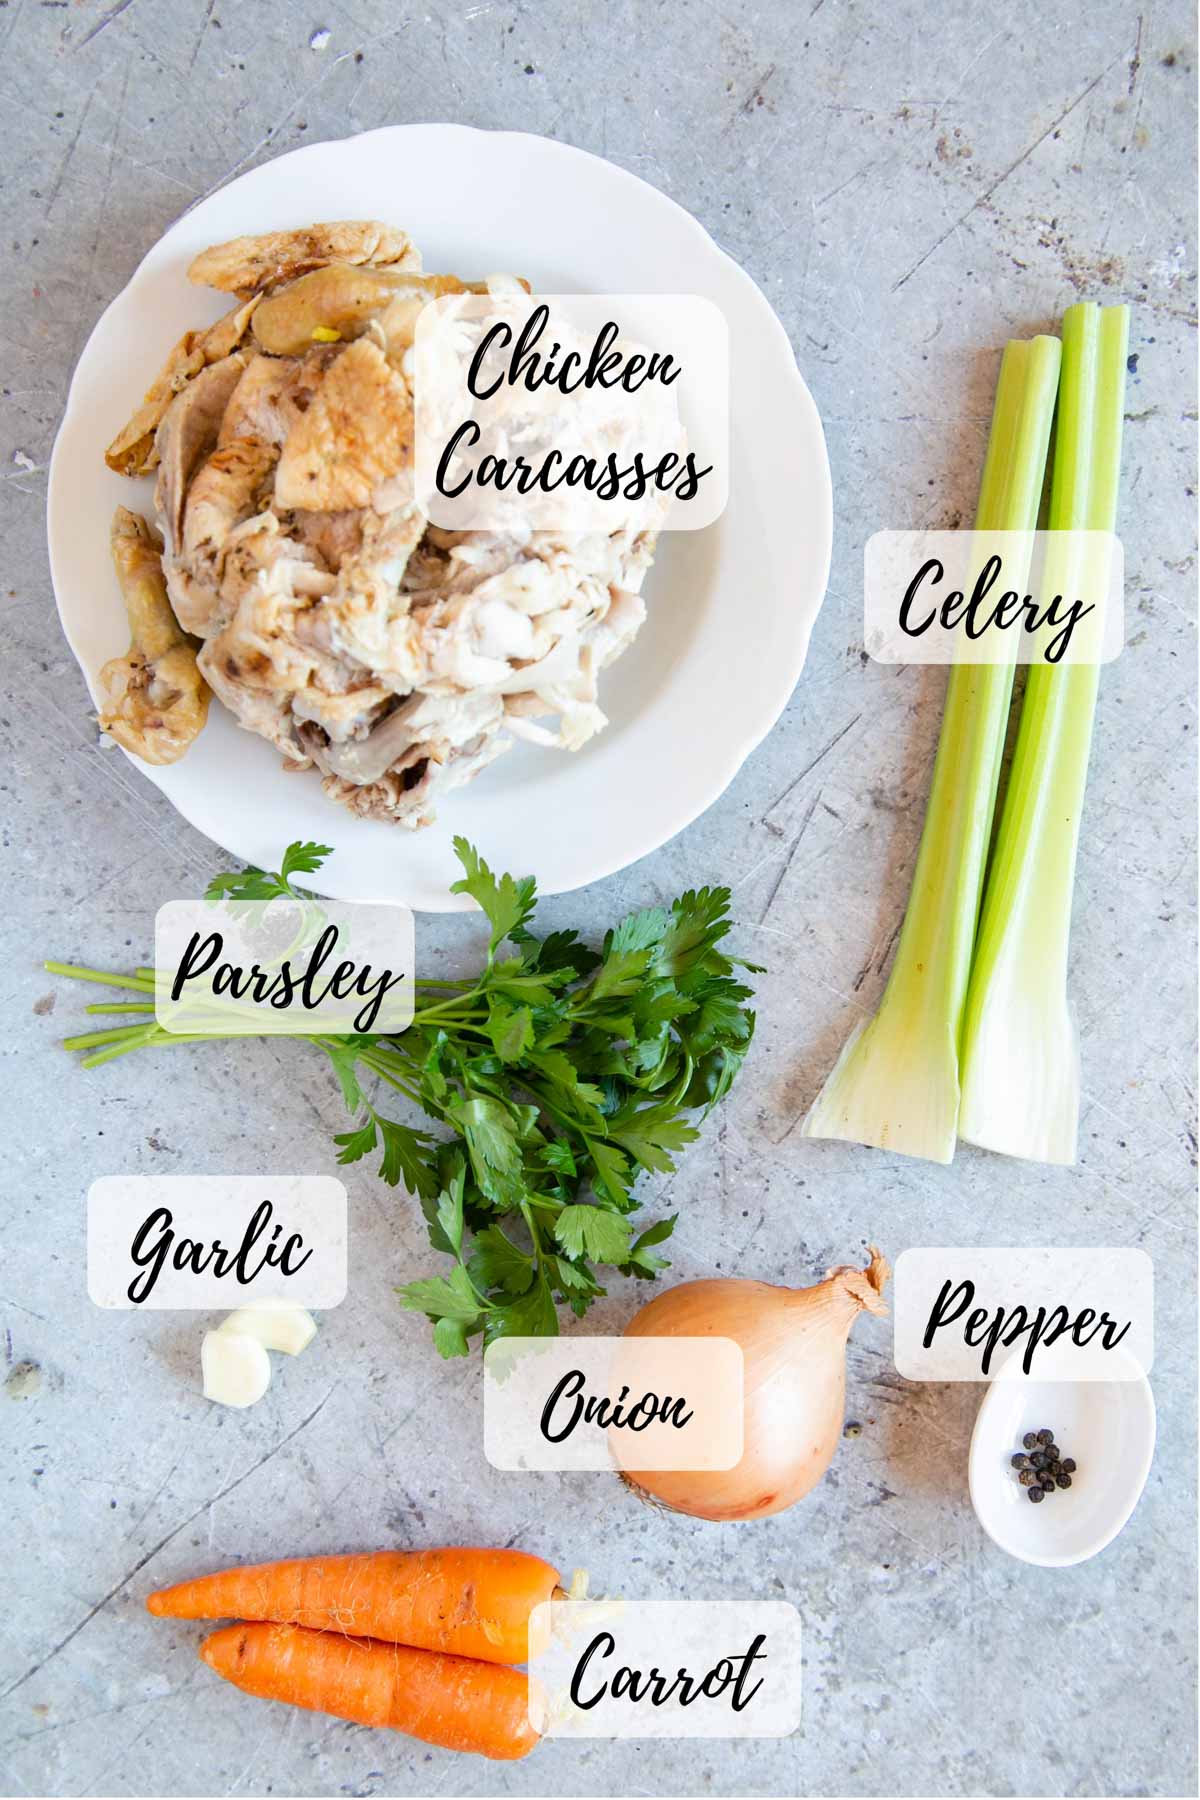 Ingredients for pressure cooker chicken stock: chicken carcasses, celery, pepper corns, onion, carrot, parsley and garlic.